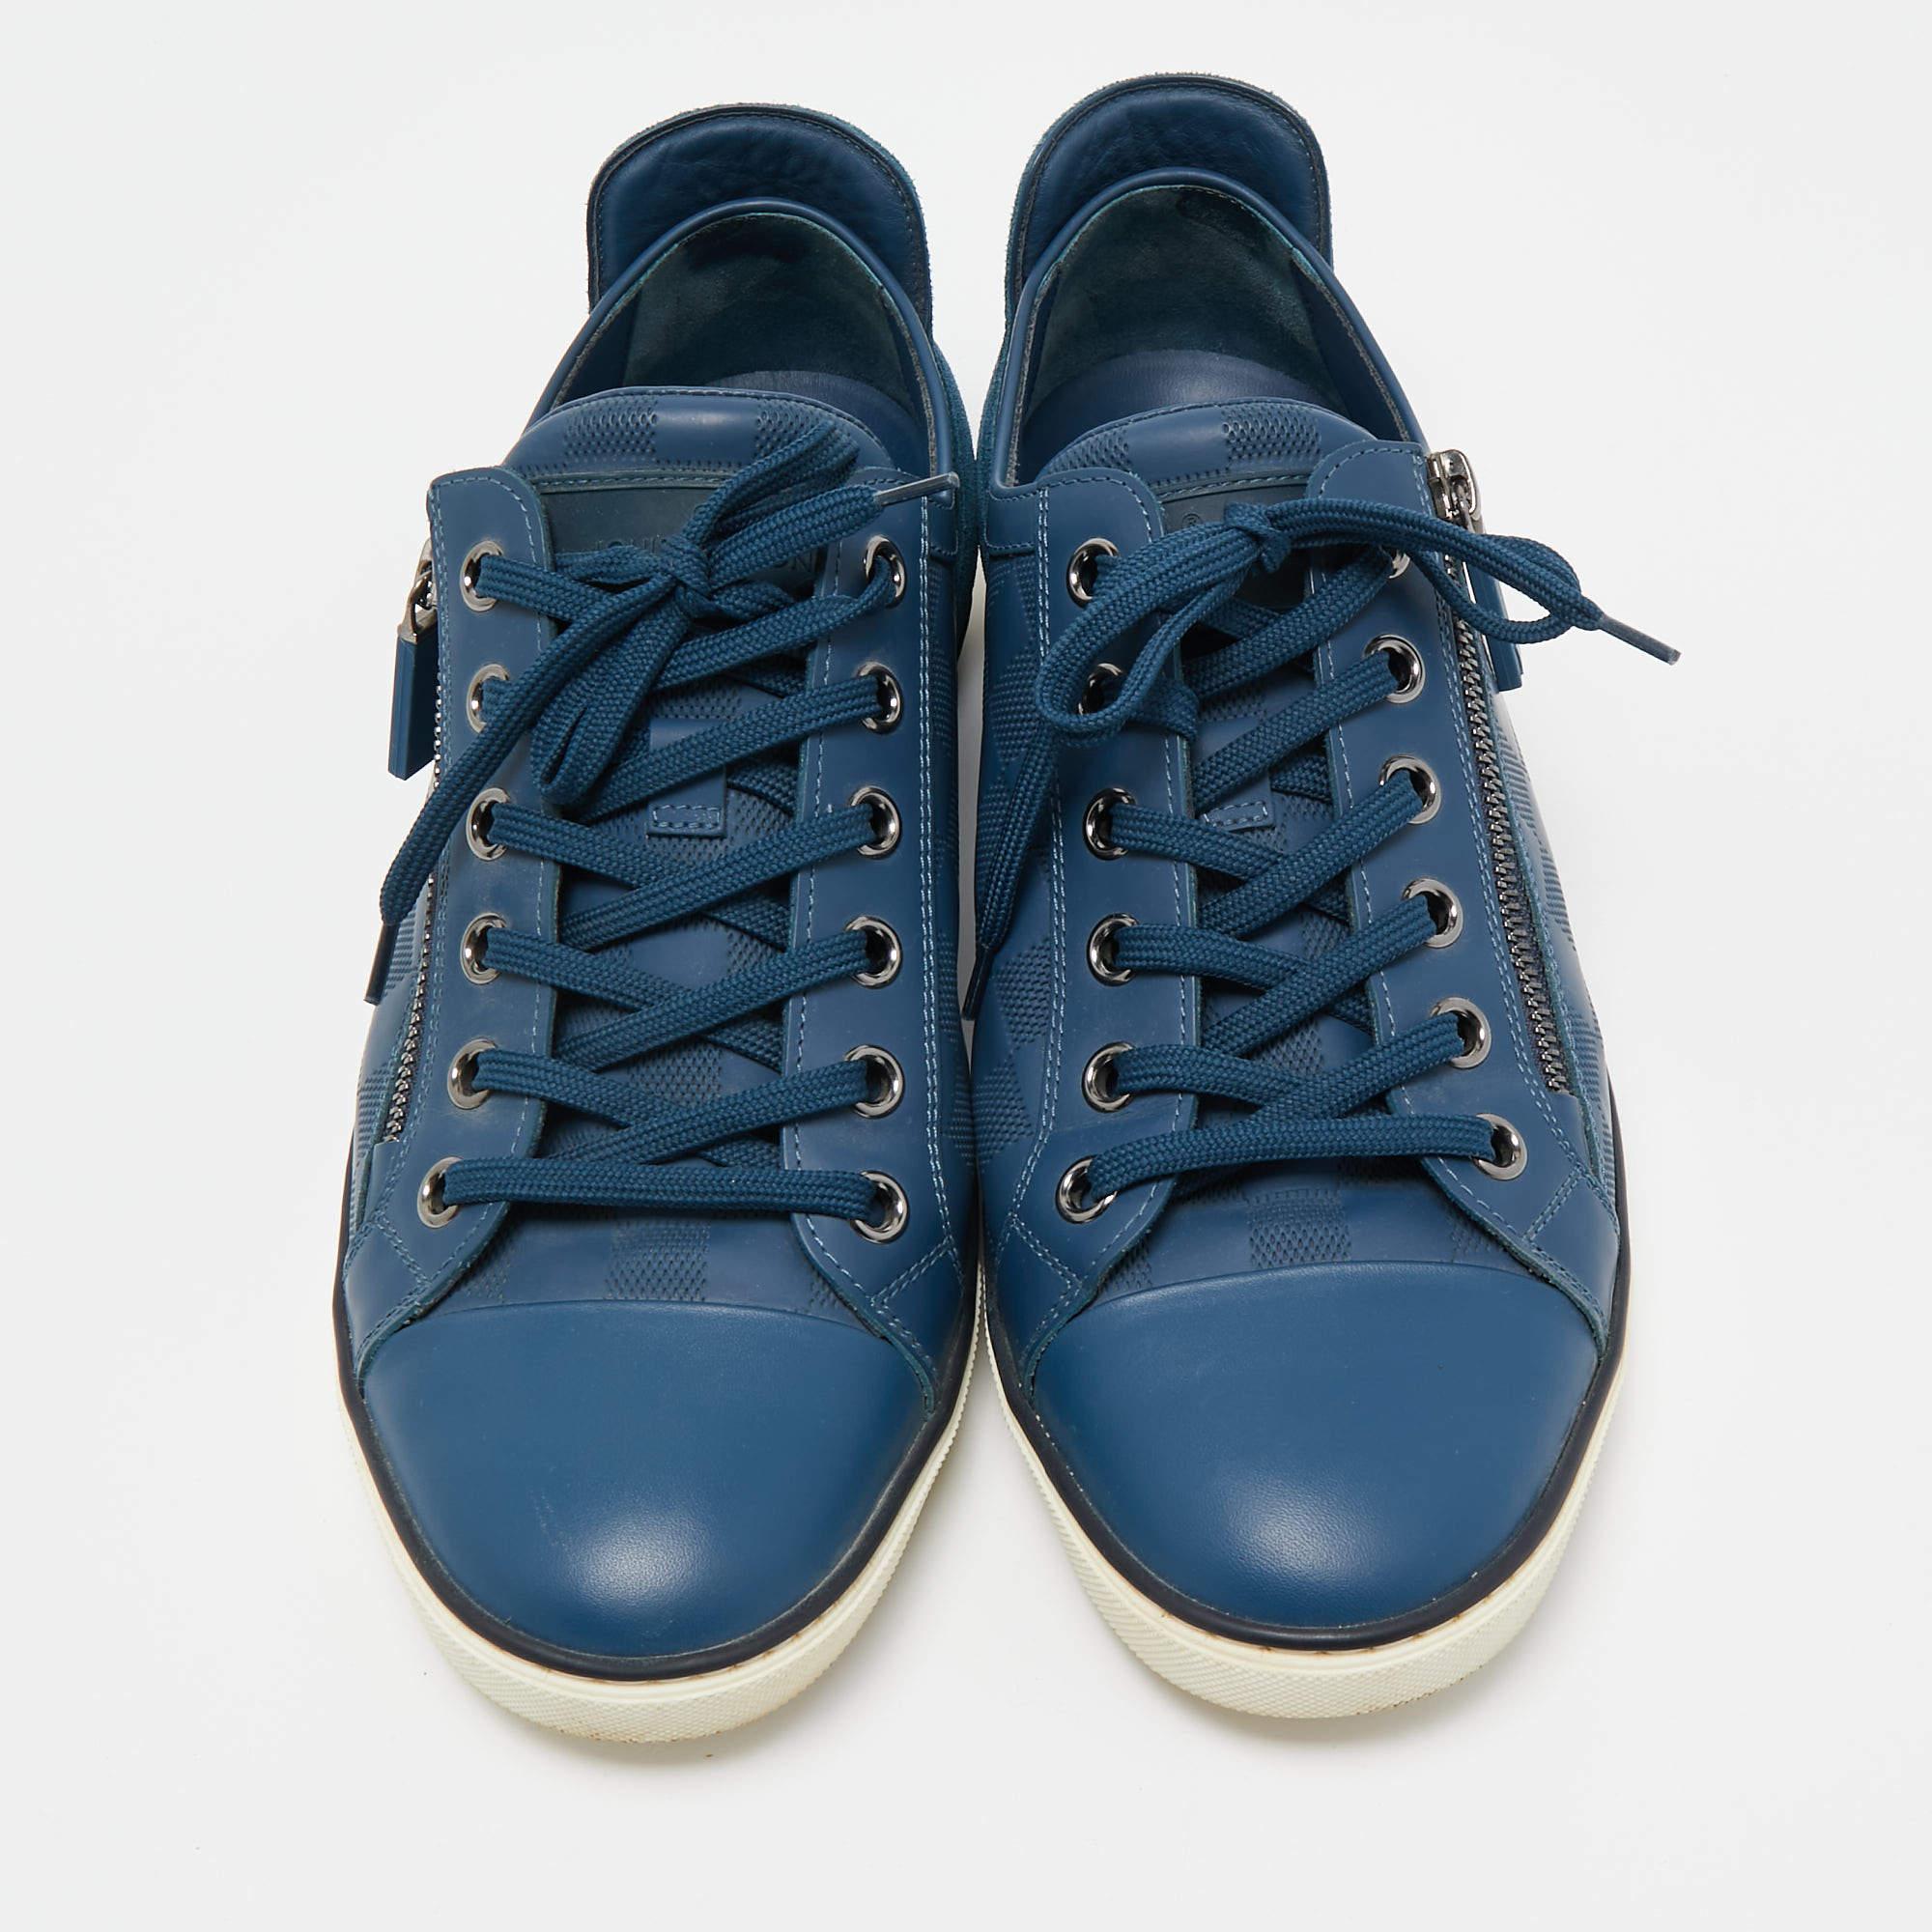 Louis Vuitton Blue Damier Embossed Leather Challenge Zip Up Sneakers Size 41.5 For Sale 1